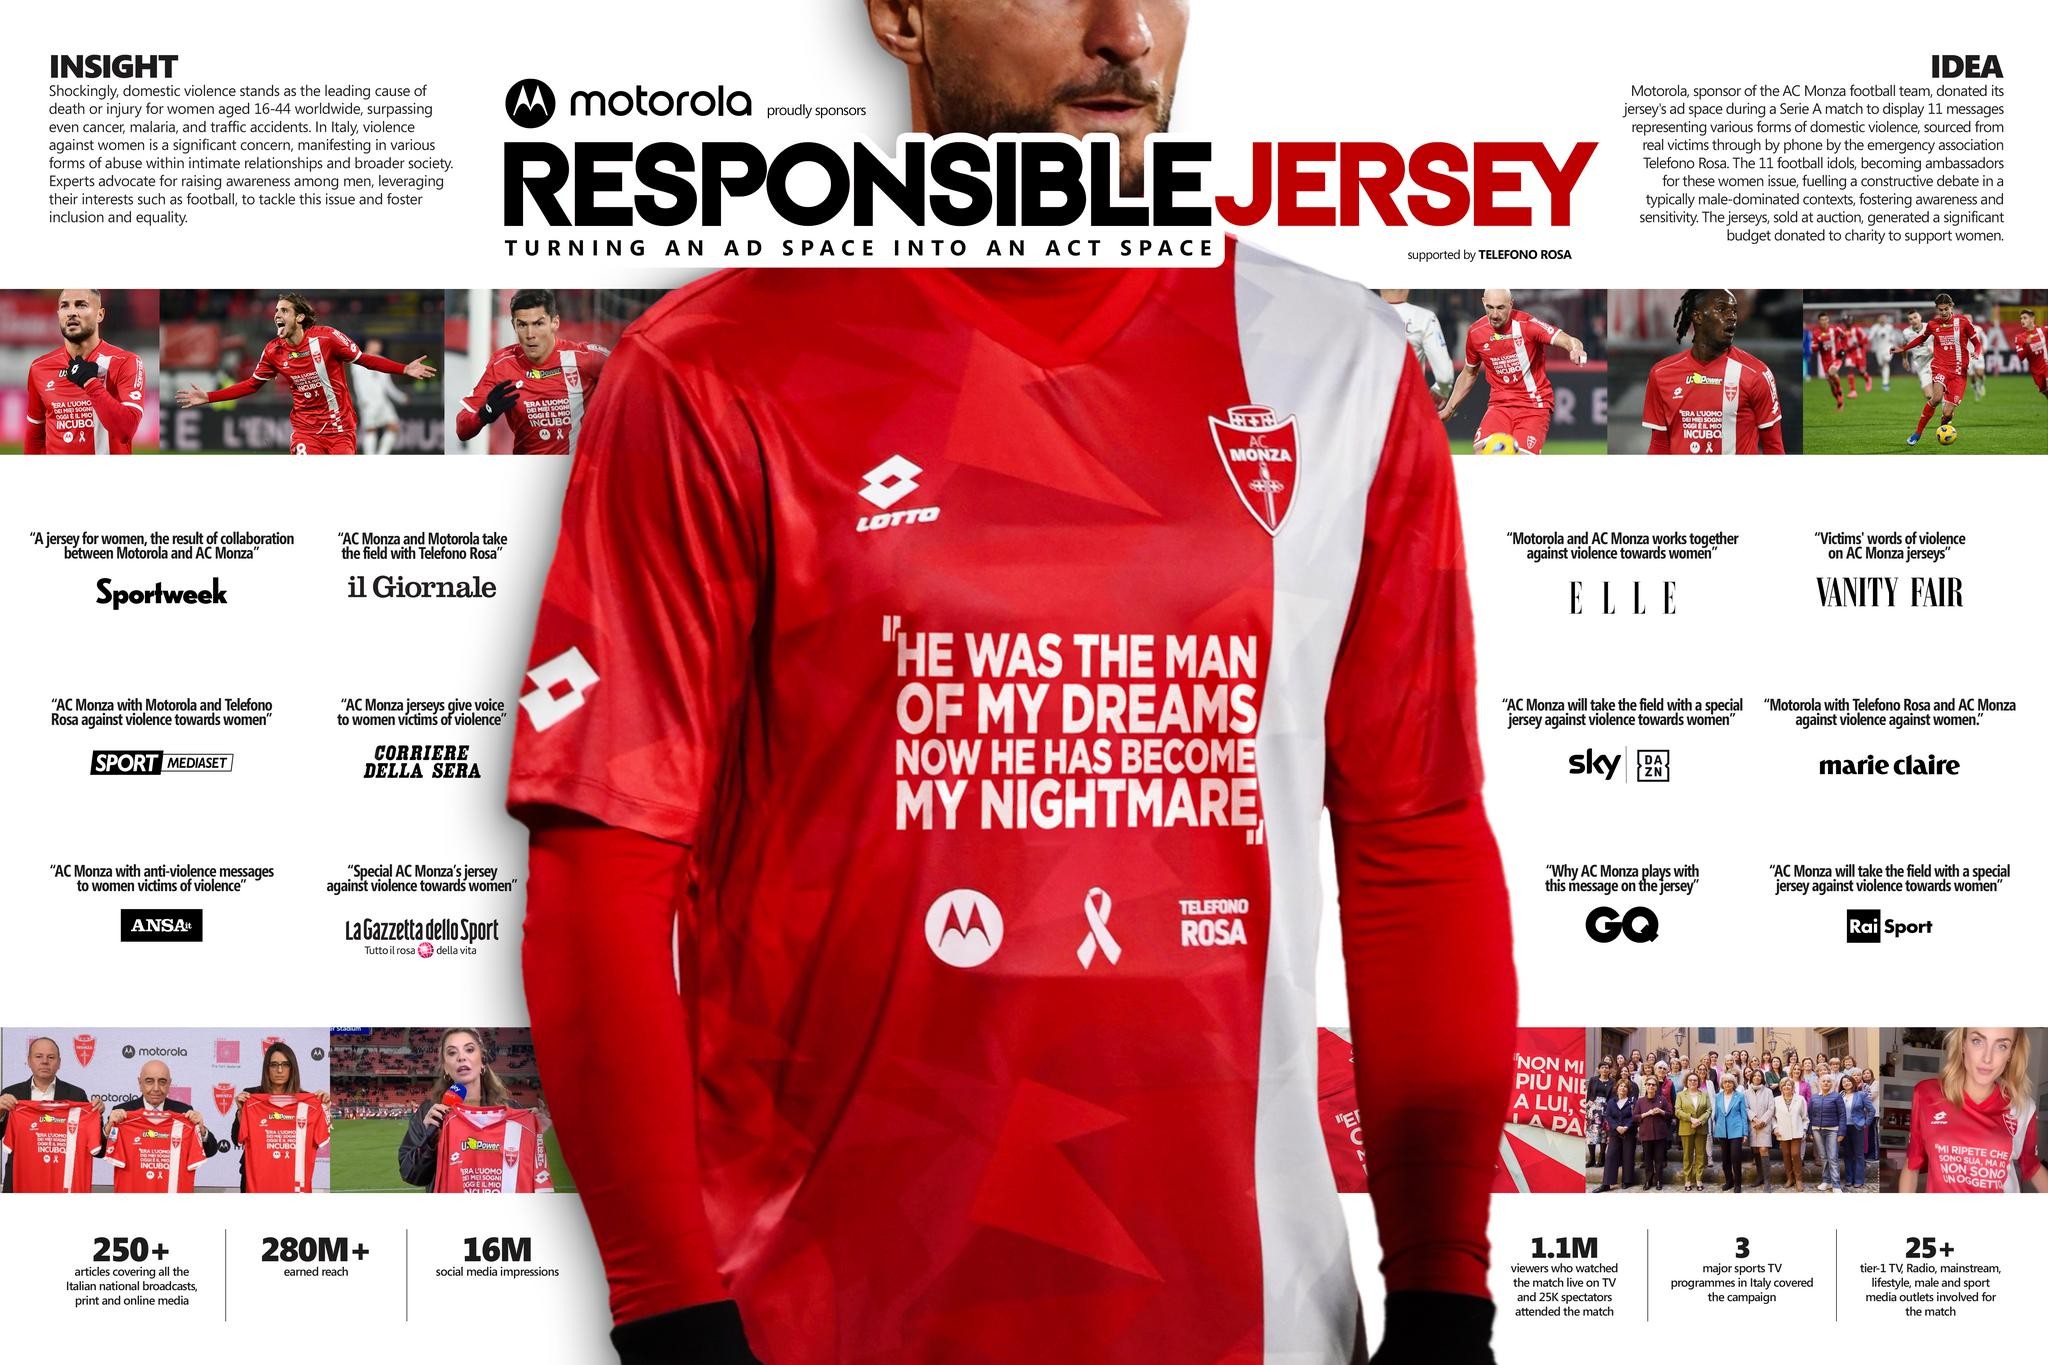 Responsible Jersey, give voice to the pain of women victims of violence